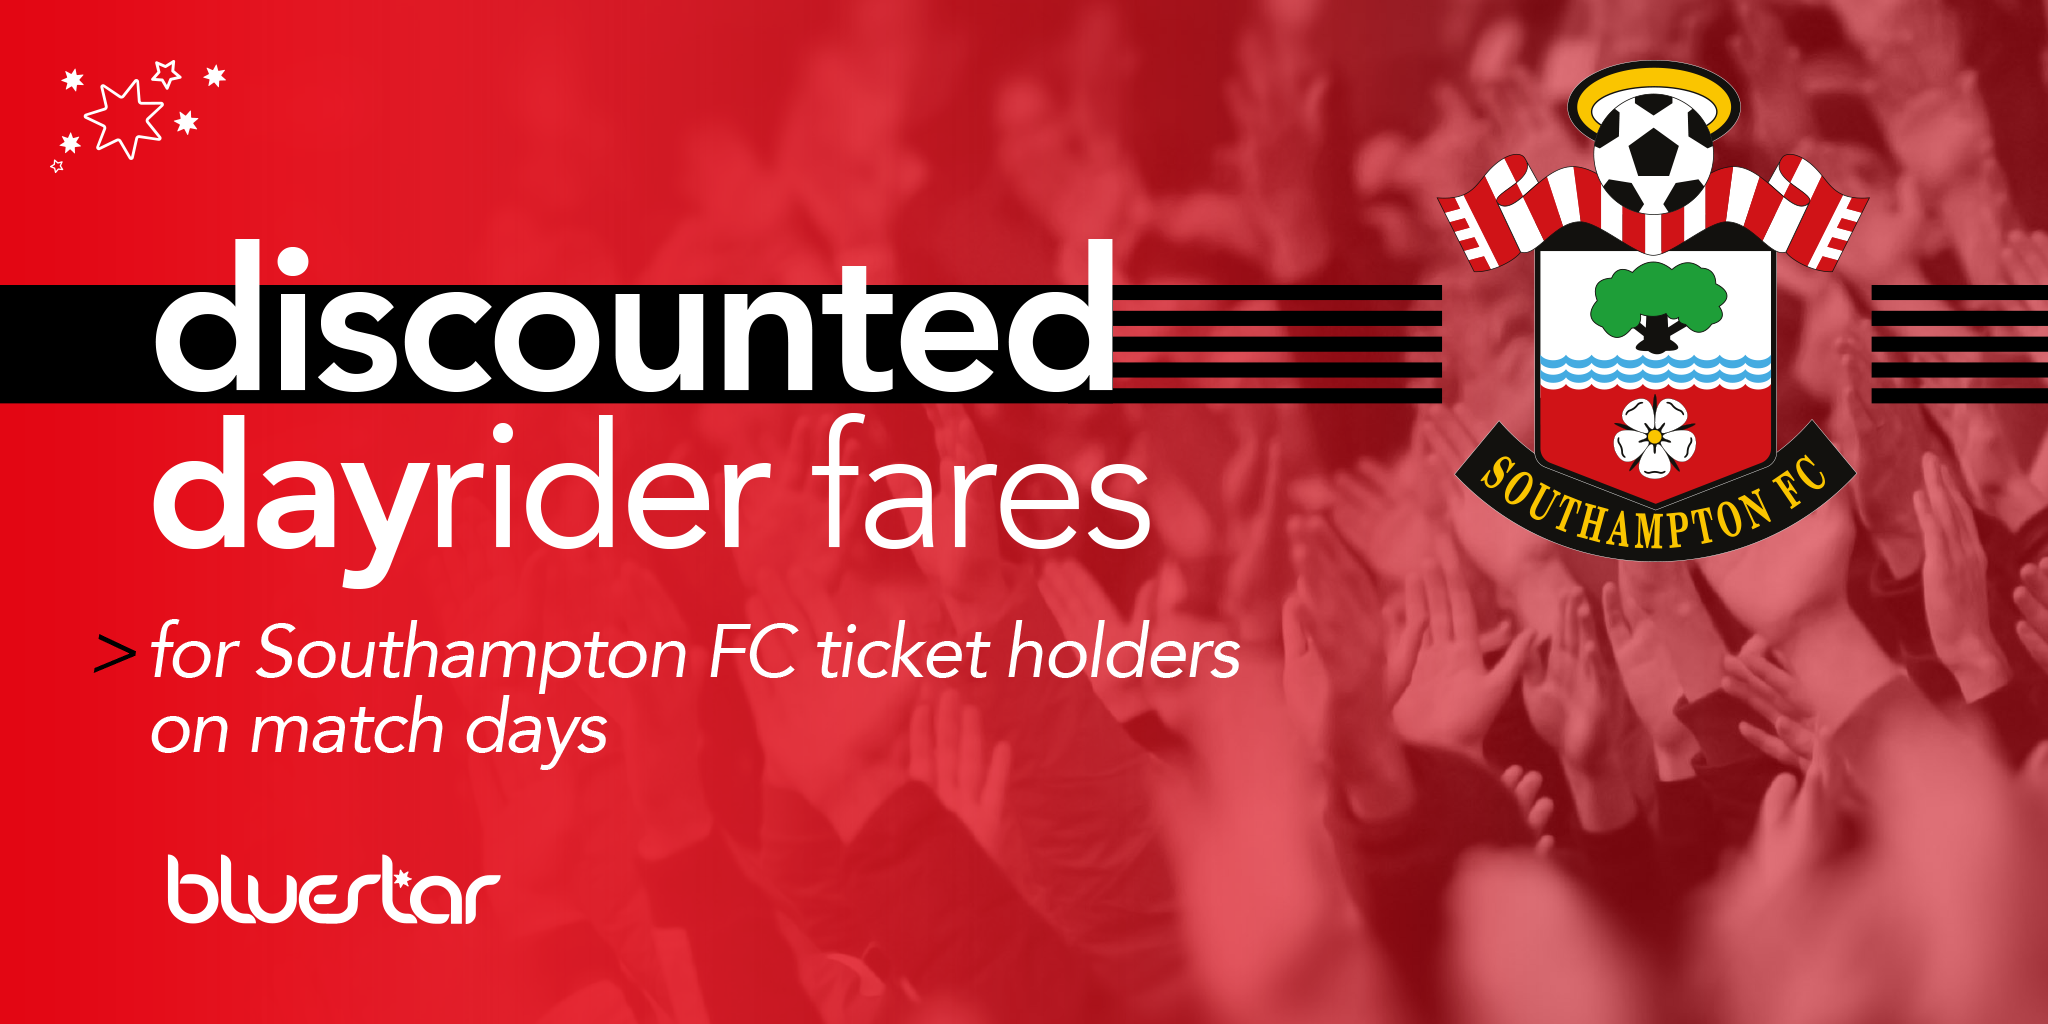 Discounted dayriders for Saints fans on match days image